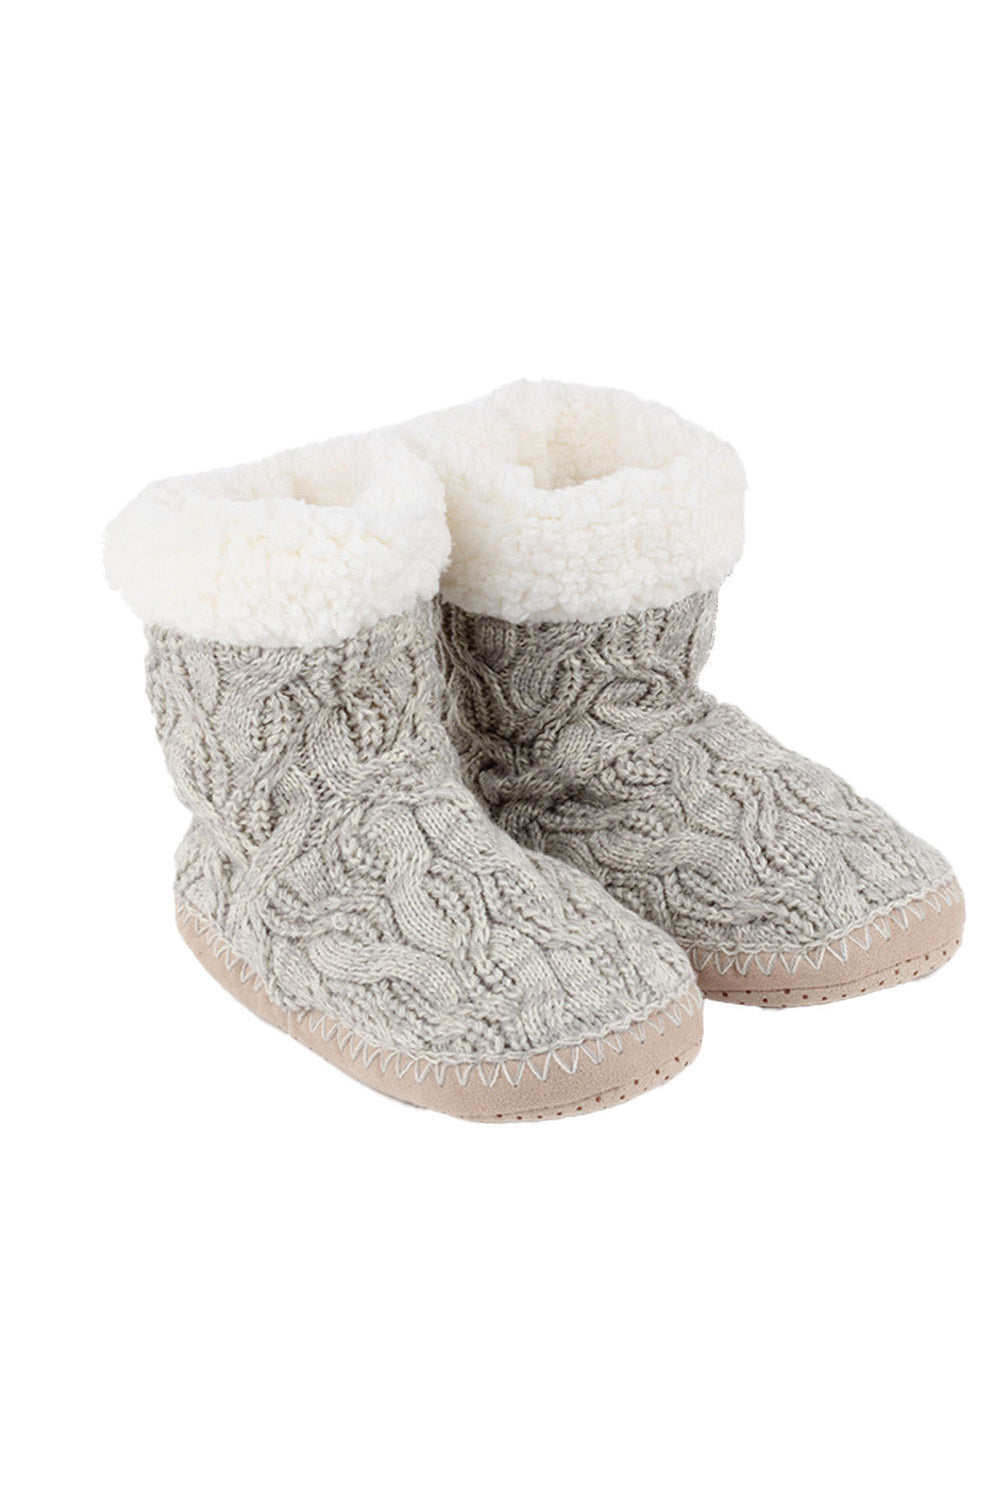 Cable knit home booties with faux sherpa lining and anti-slip sole.